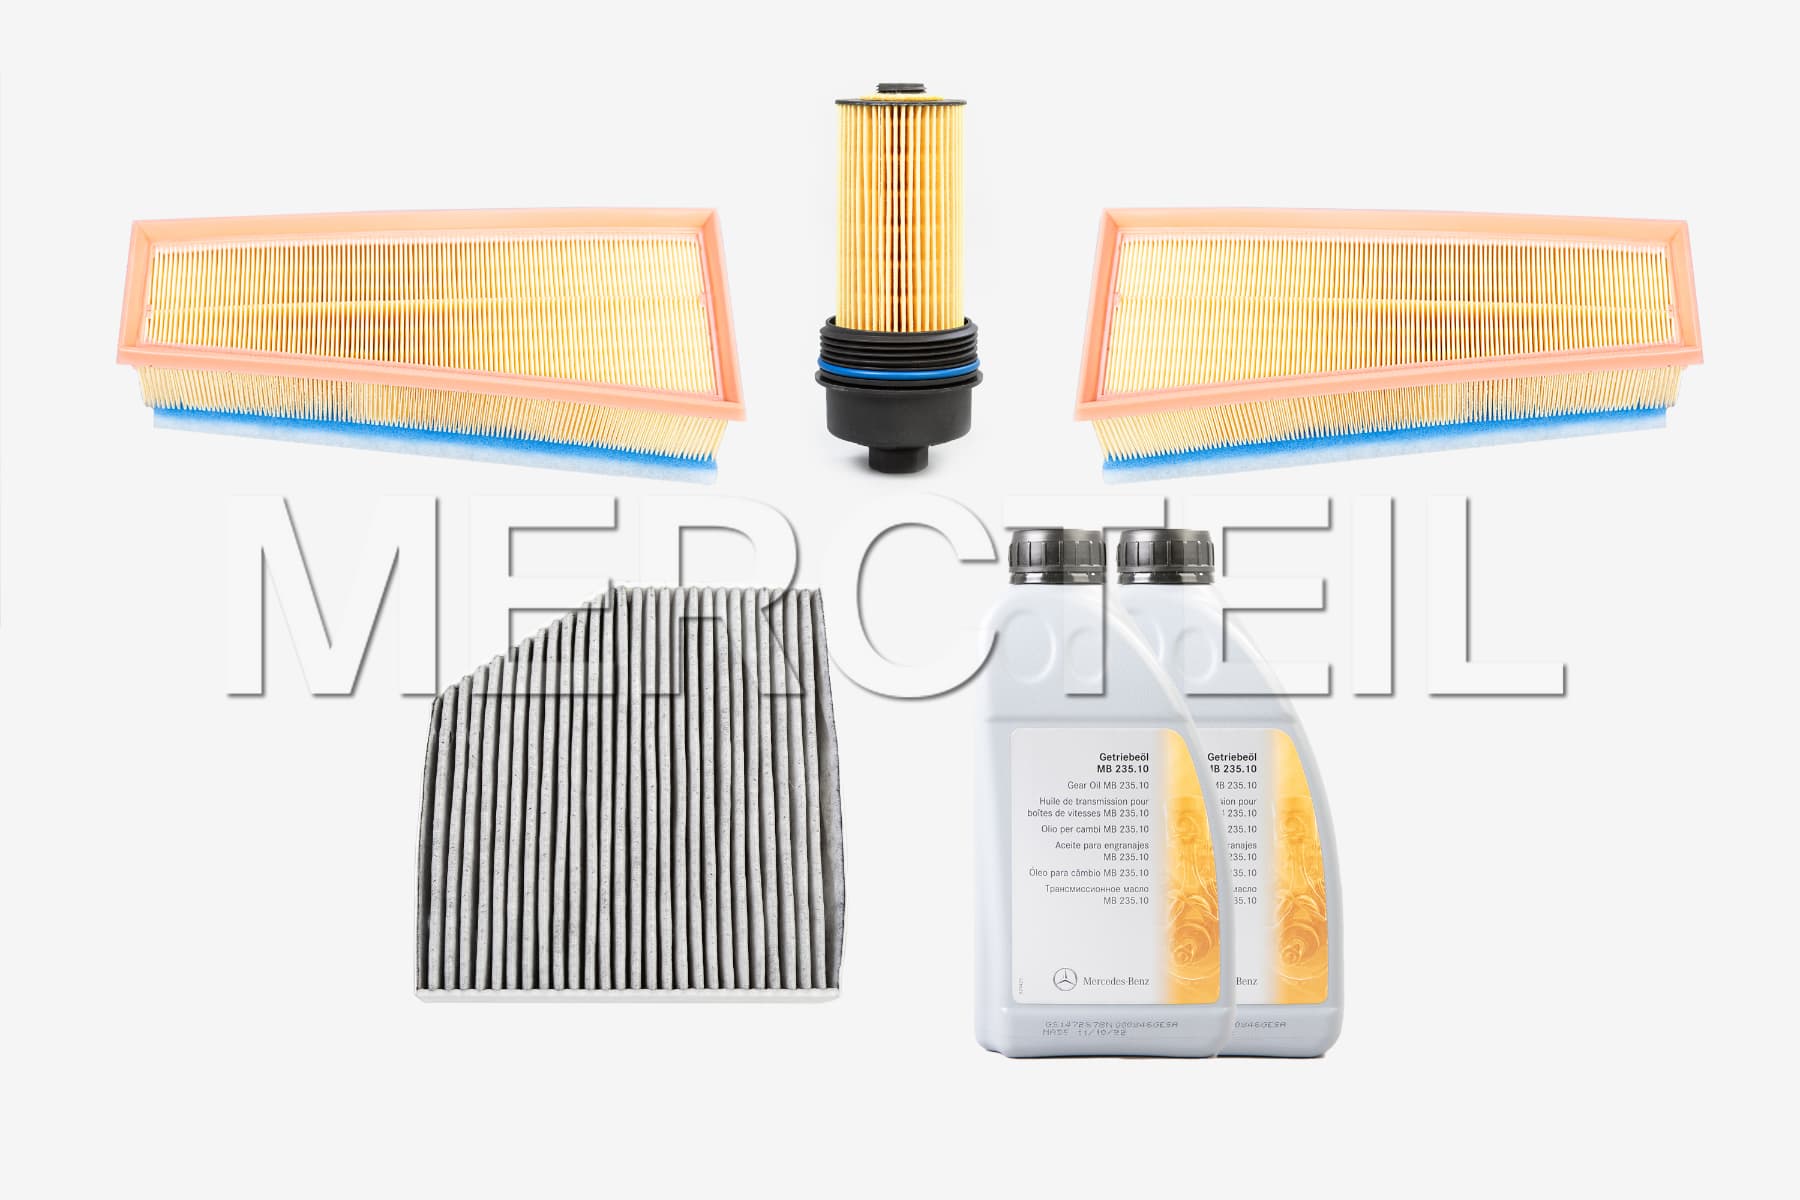 Facelift S63 AMG Coupe Intermediate Maintenance Service Kit A/C217 Genuine Mercedes-AMG